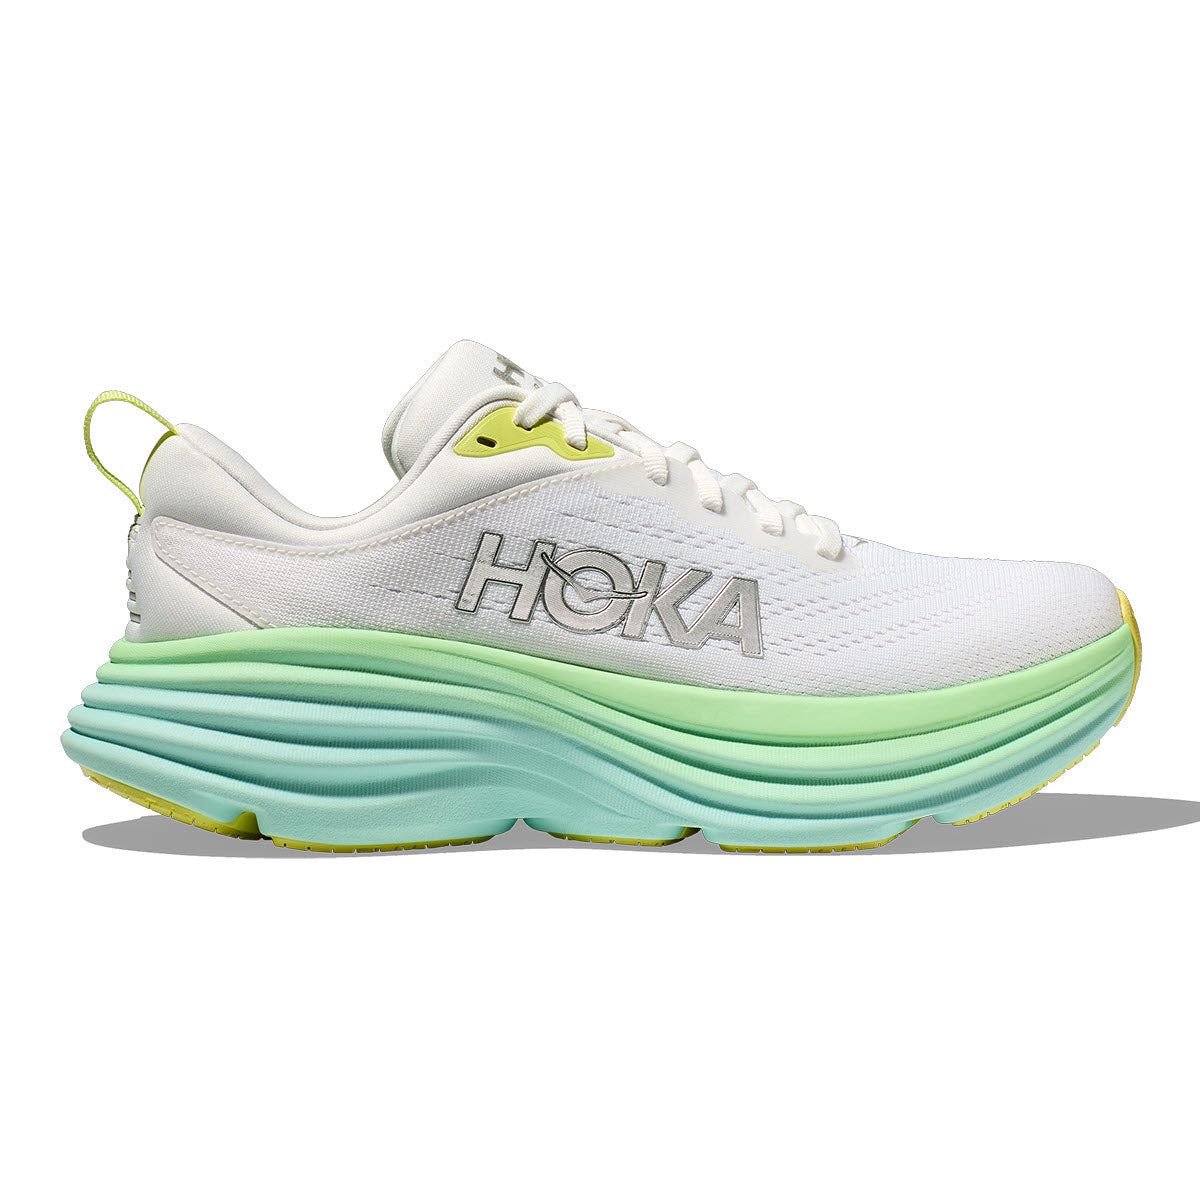 White HOKA BONDI 8 running shoe with thick green sole and yellow accents, featuring the APMA Seal of Acceptance.